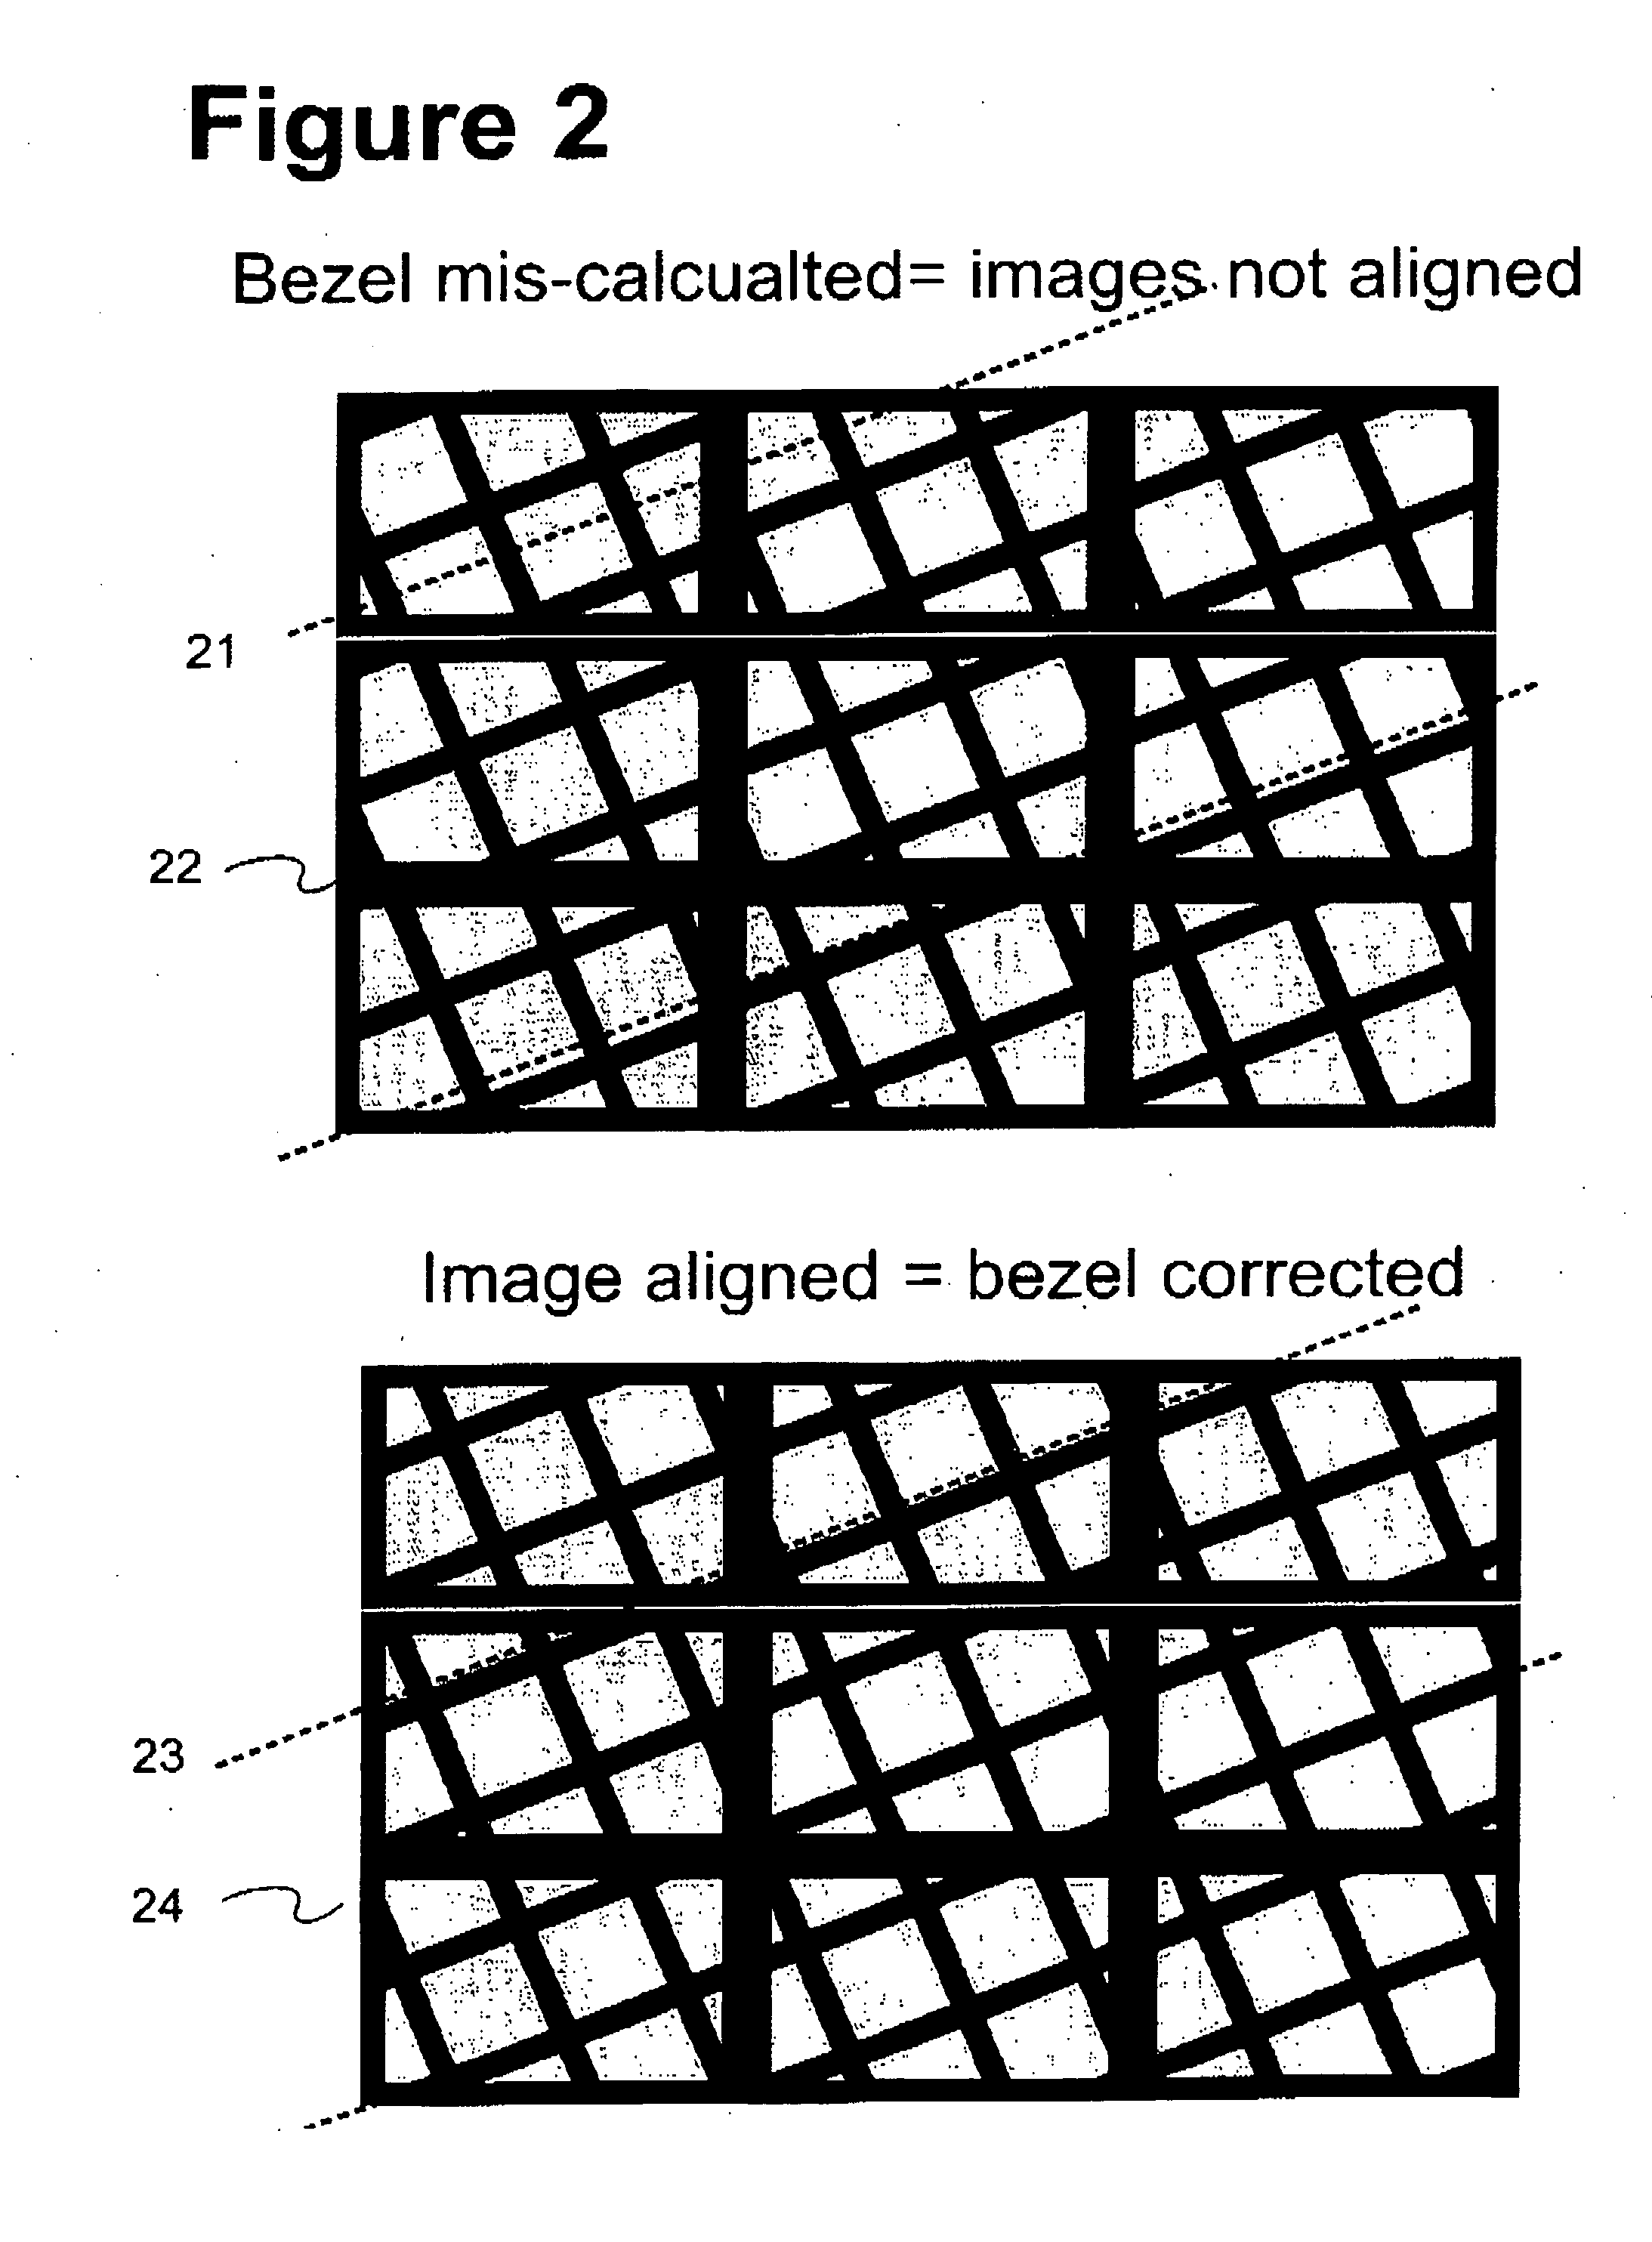 System and Method of Video Wall Setup and Adjustment Using Automated Image Analysis